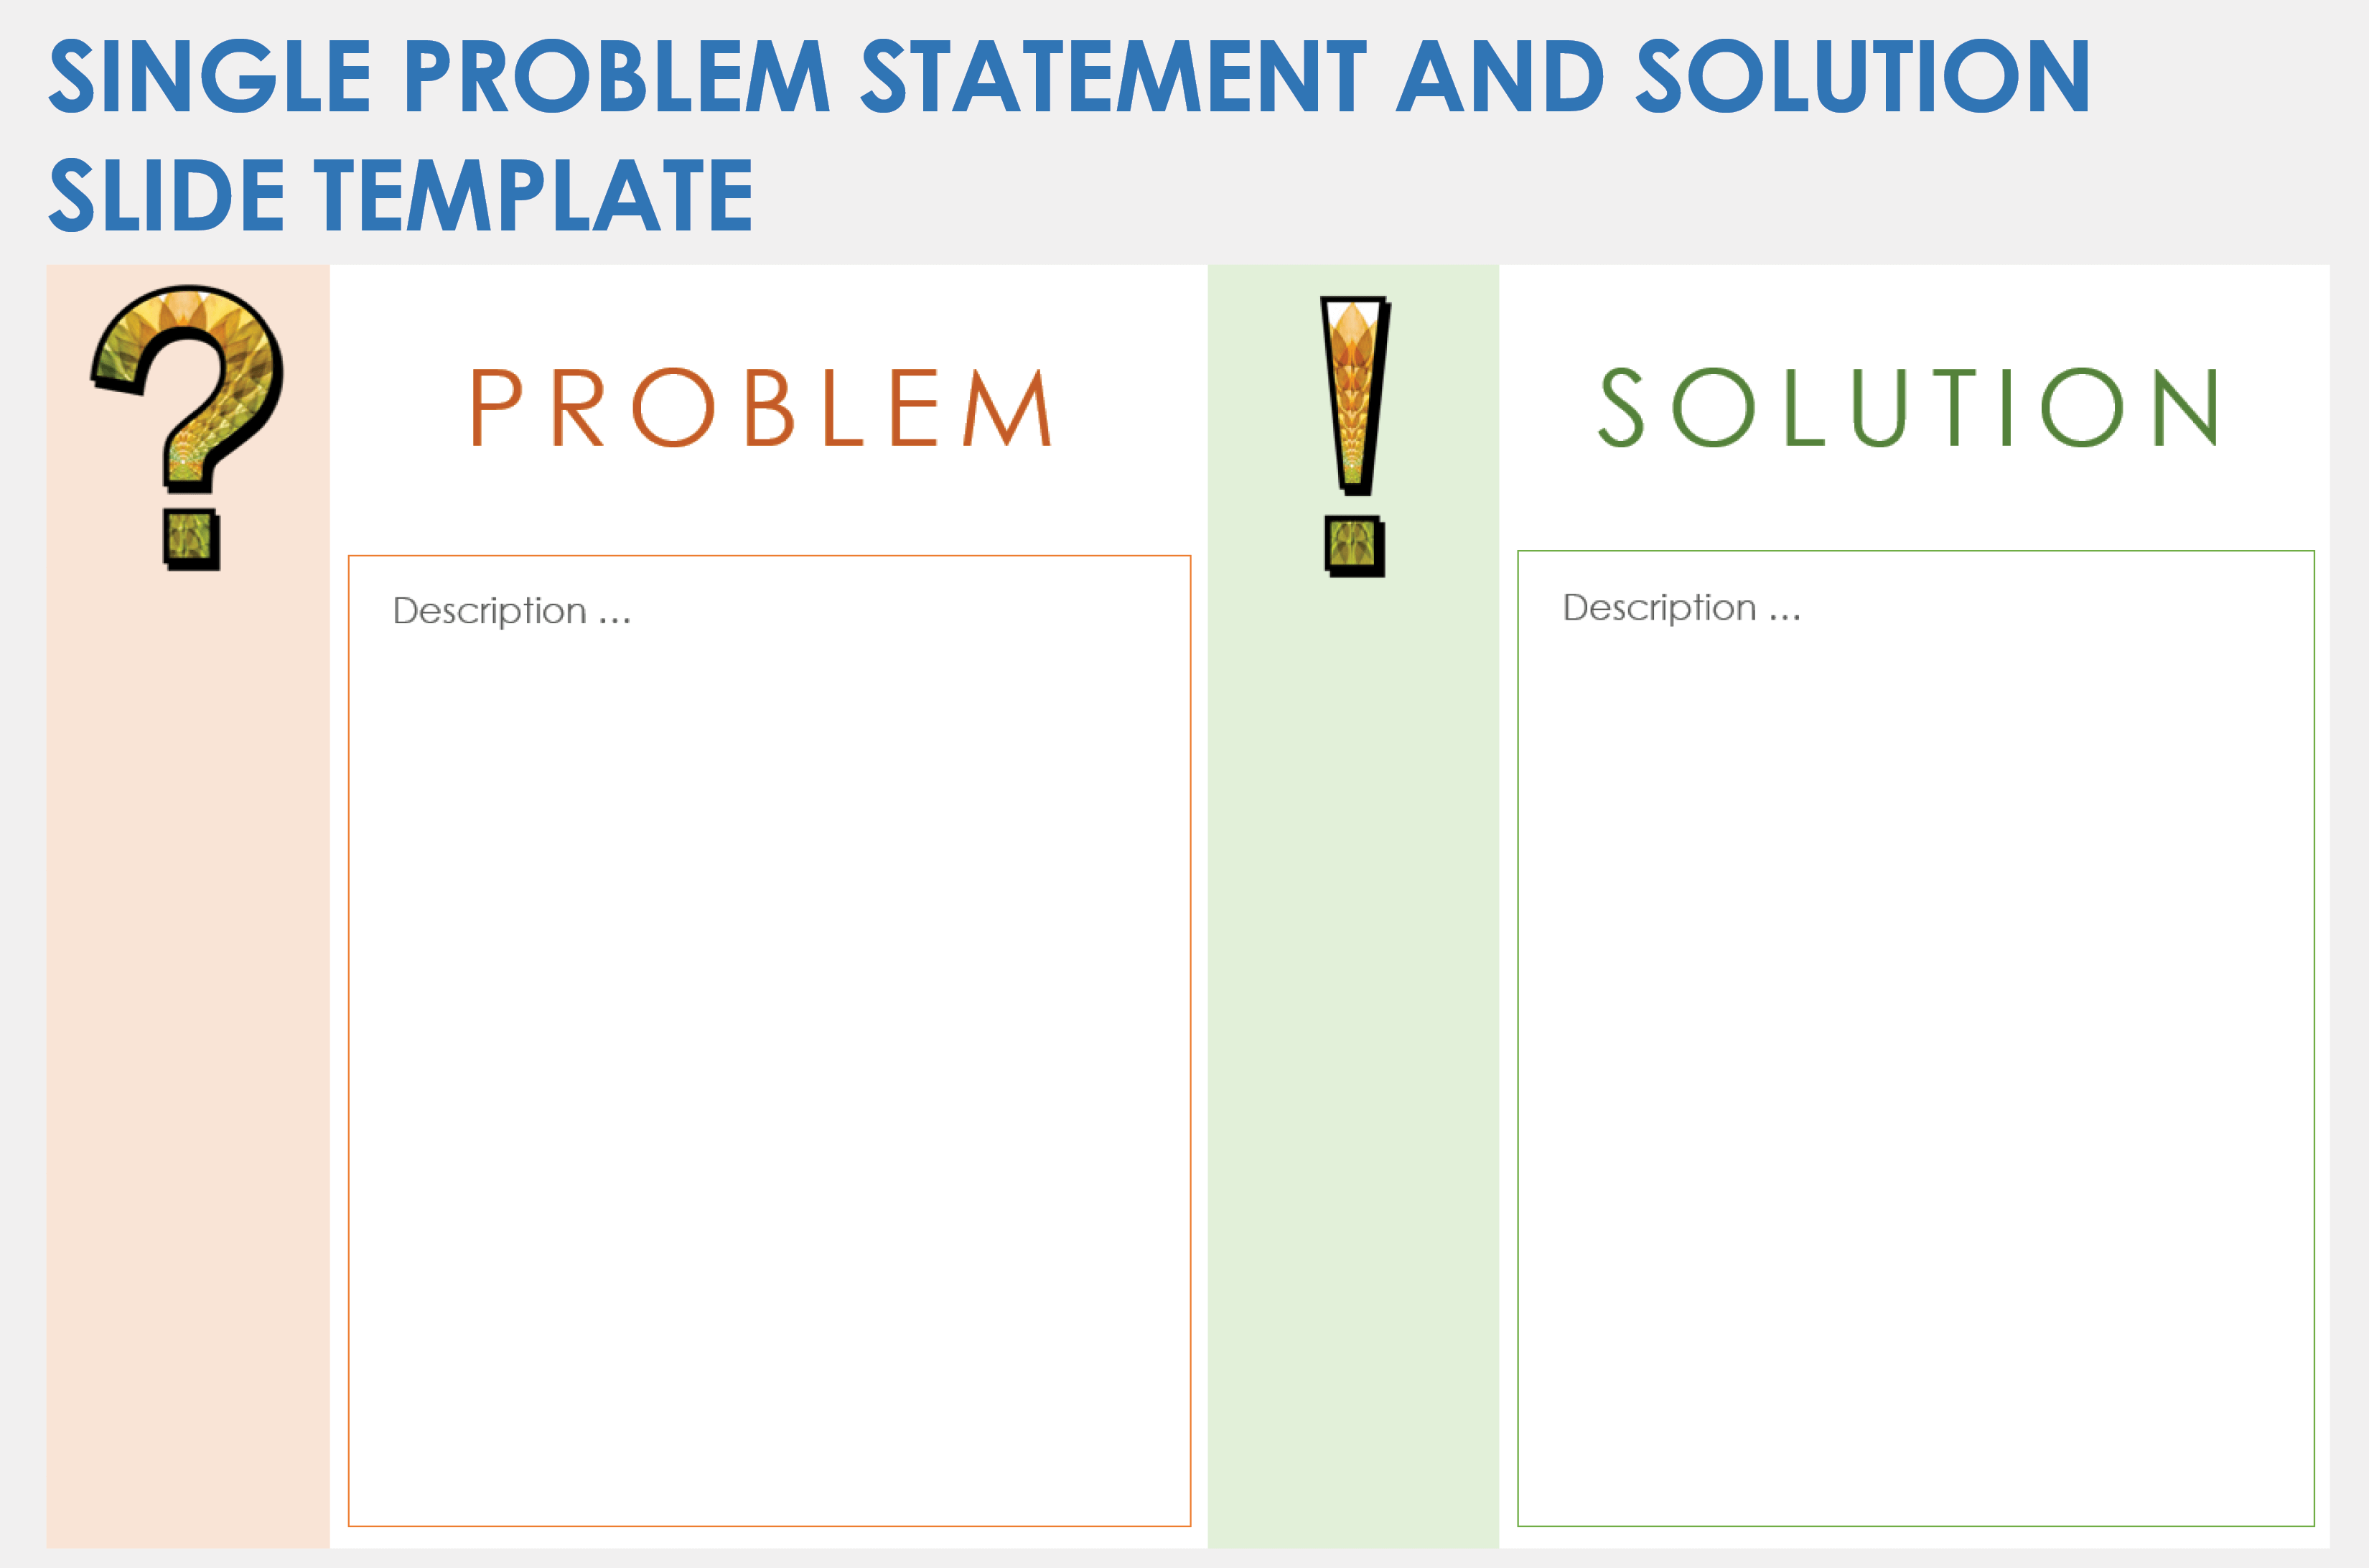 Single-Problem Statement and Solution Slide Template